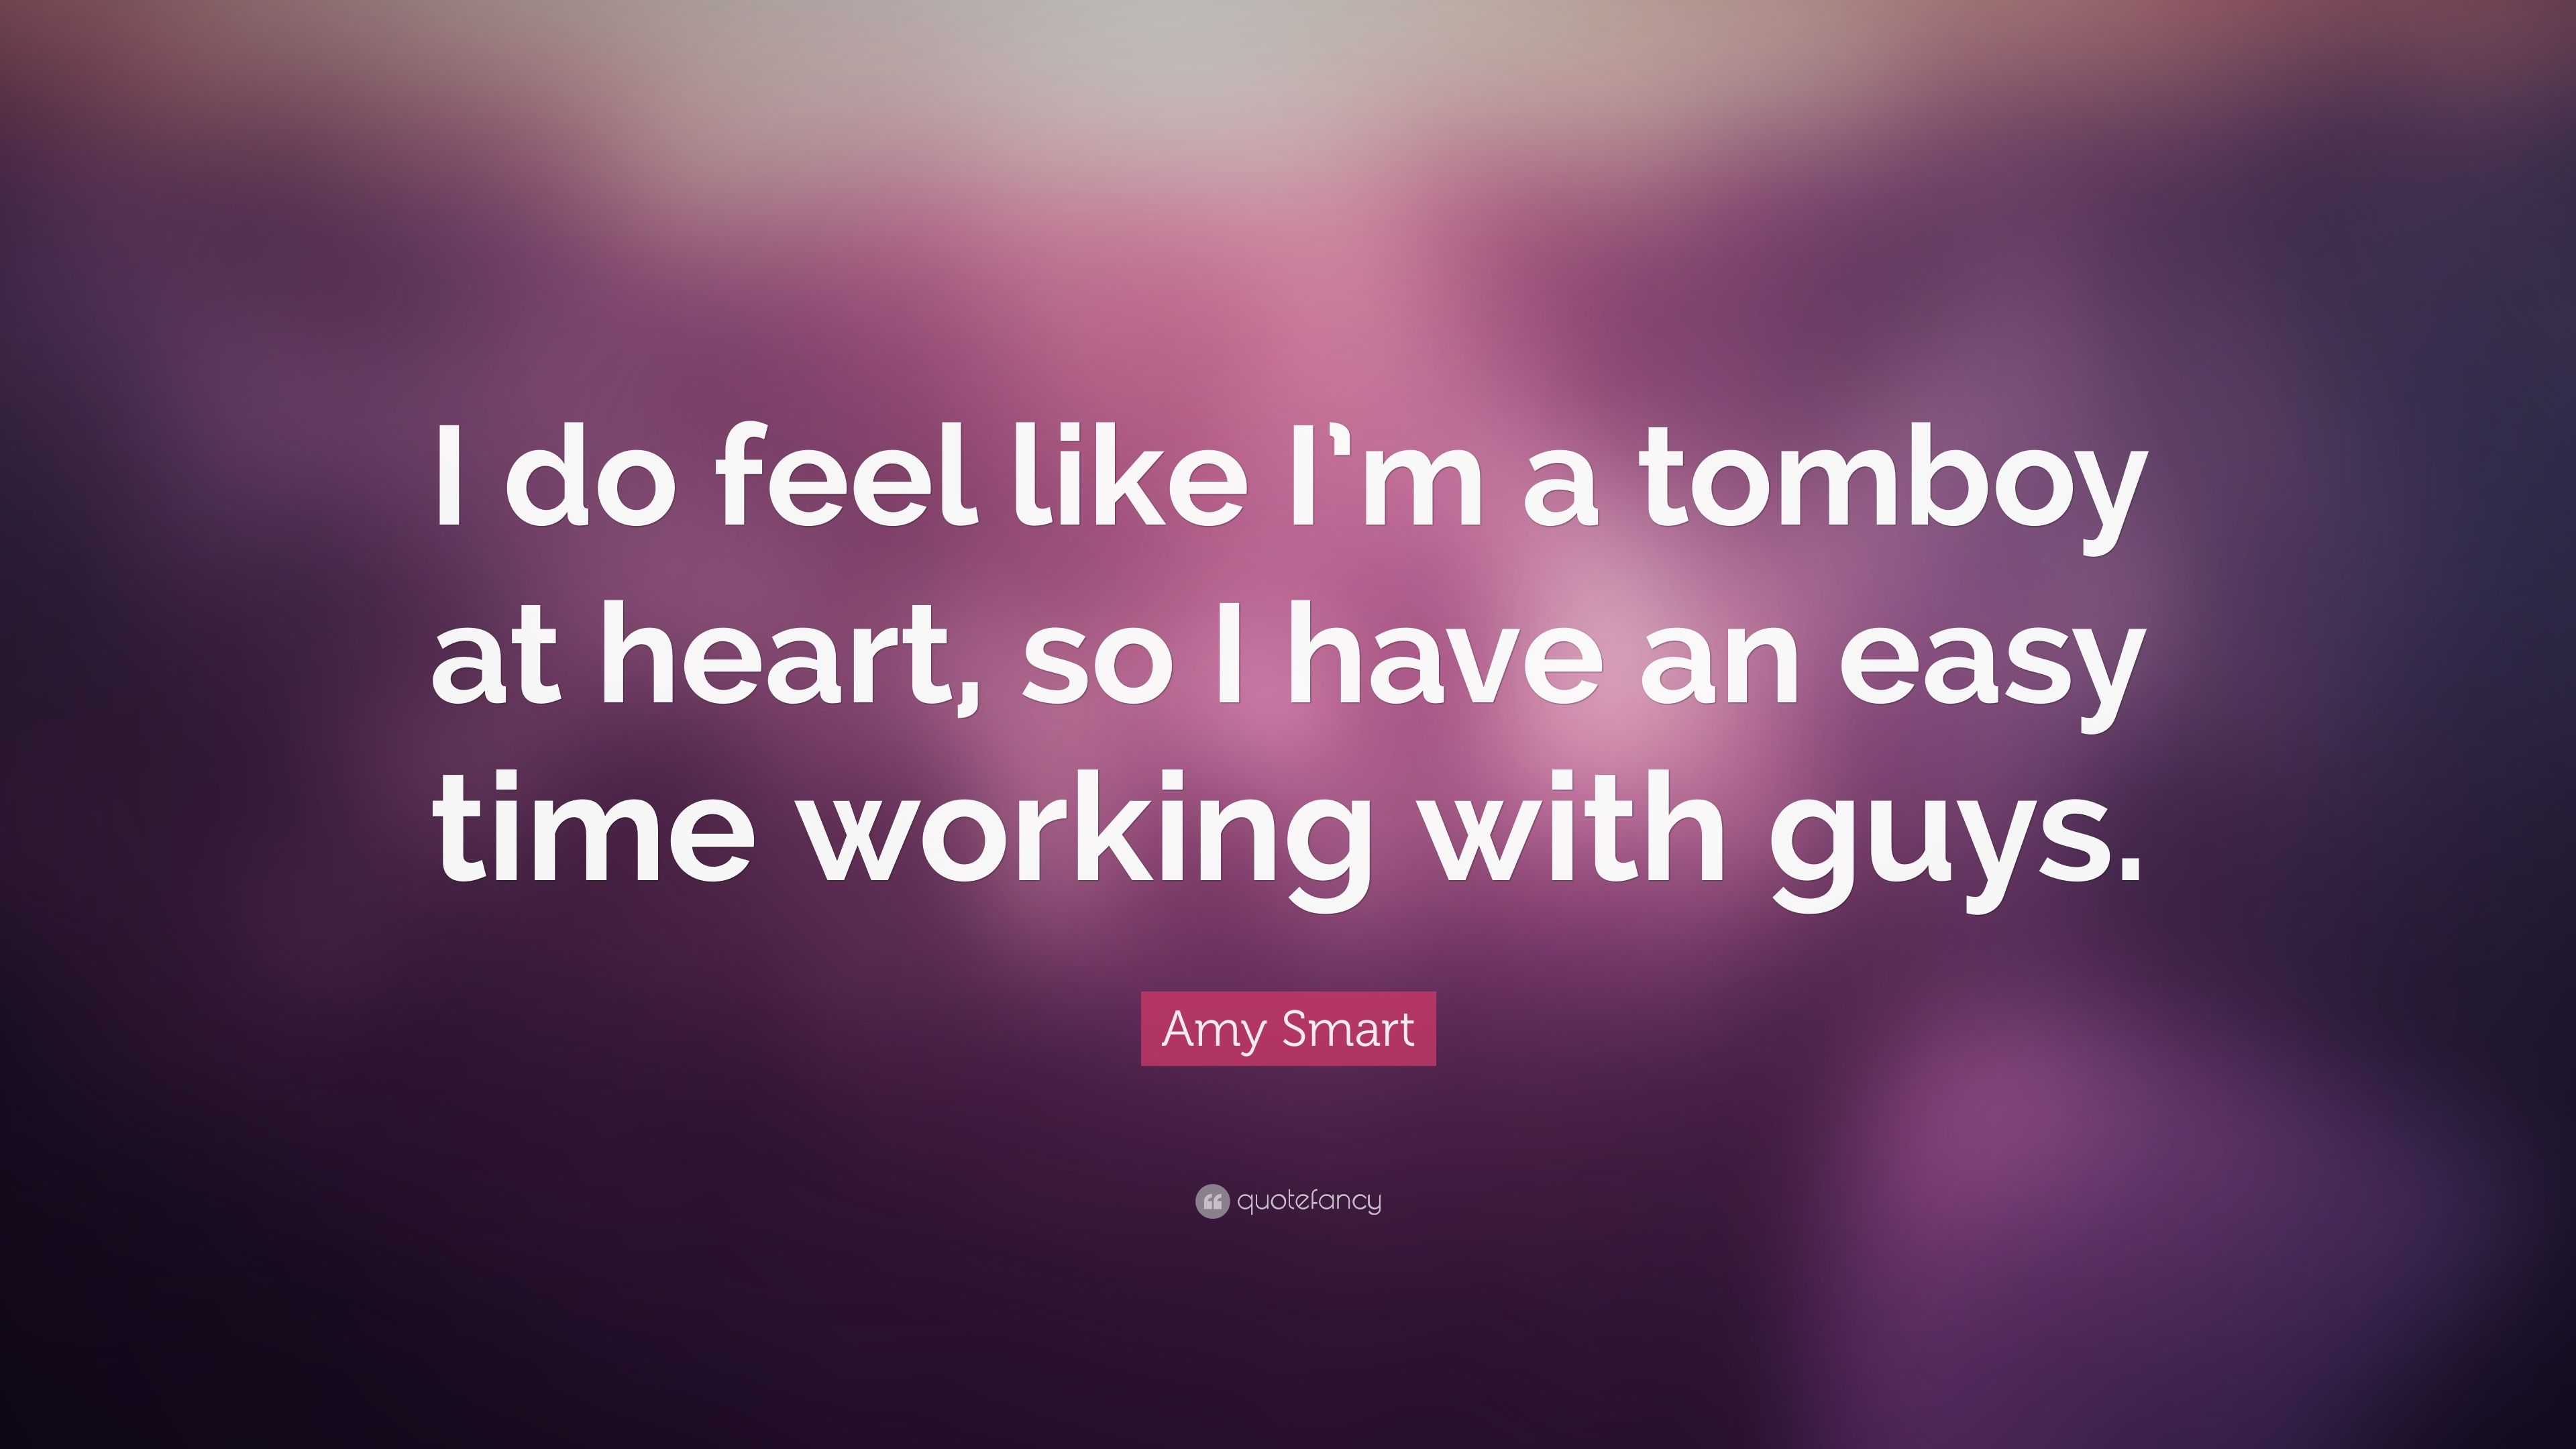 Amy Smart Quote: “I do feel like I'm a tomboy at heart, so I have